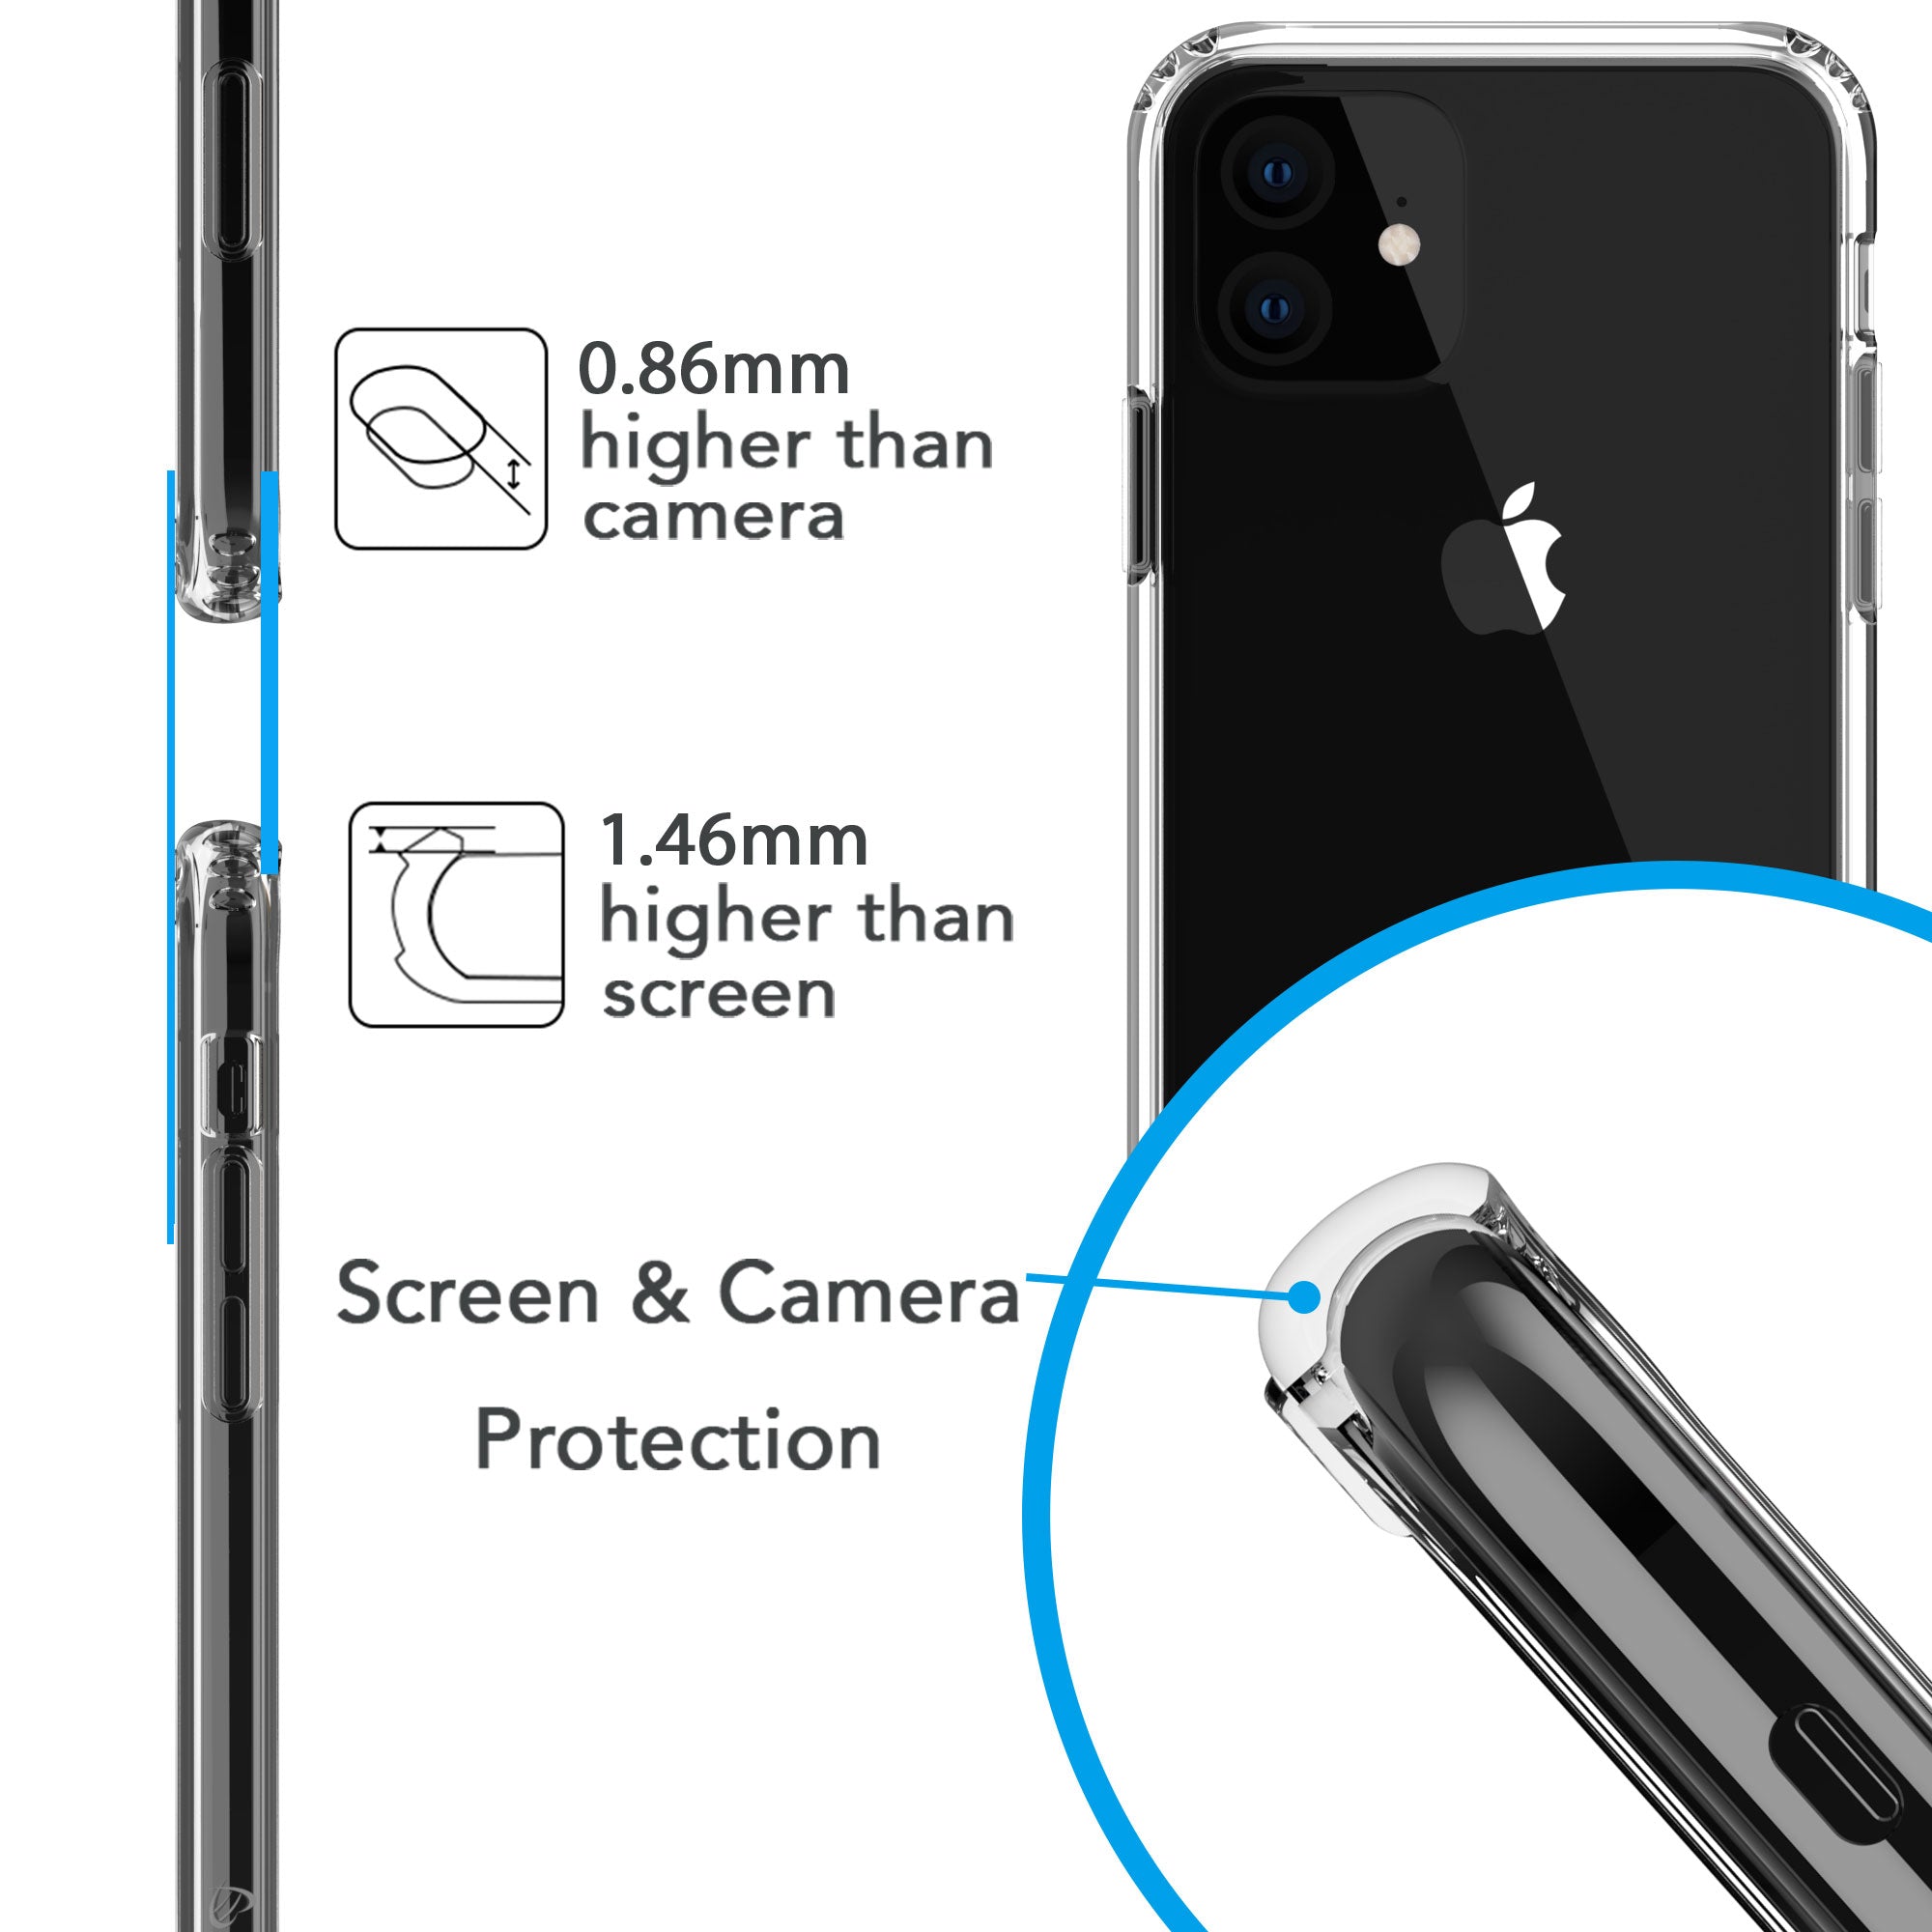 Luvvitt Clear View Case and Liquid Glass Screen Protector Bundle for iPhone 11 2019